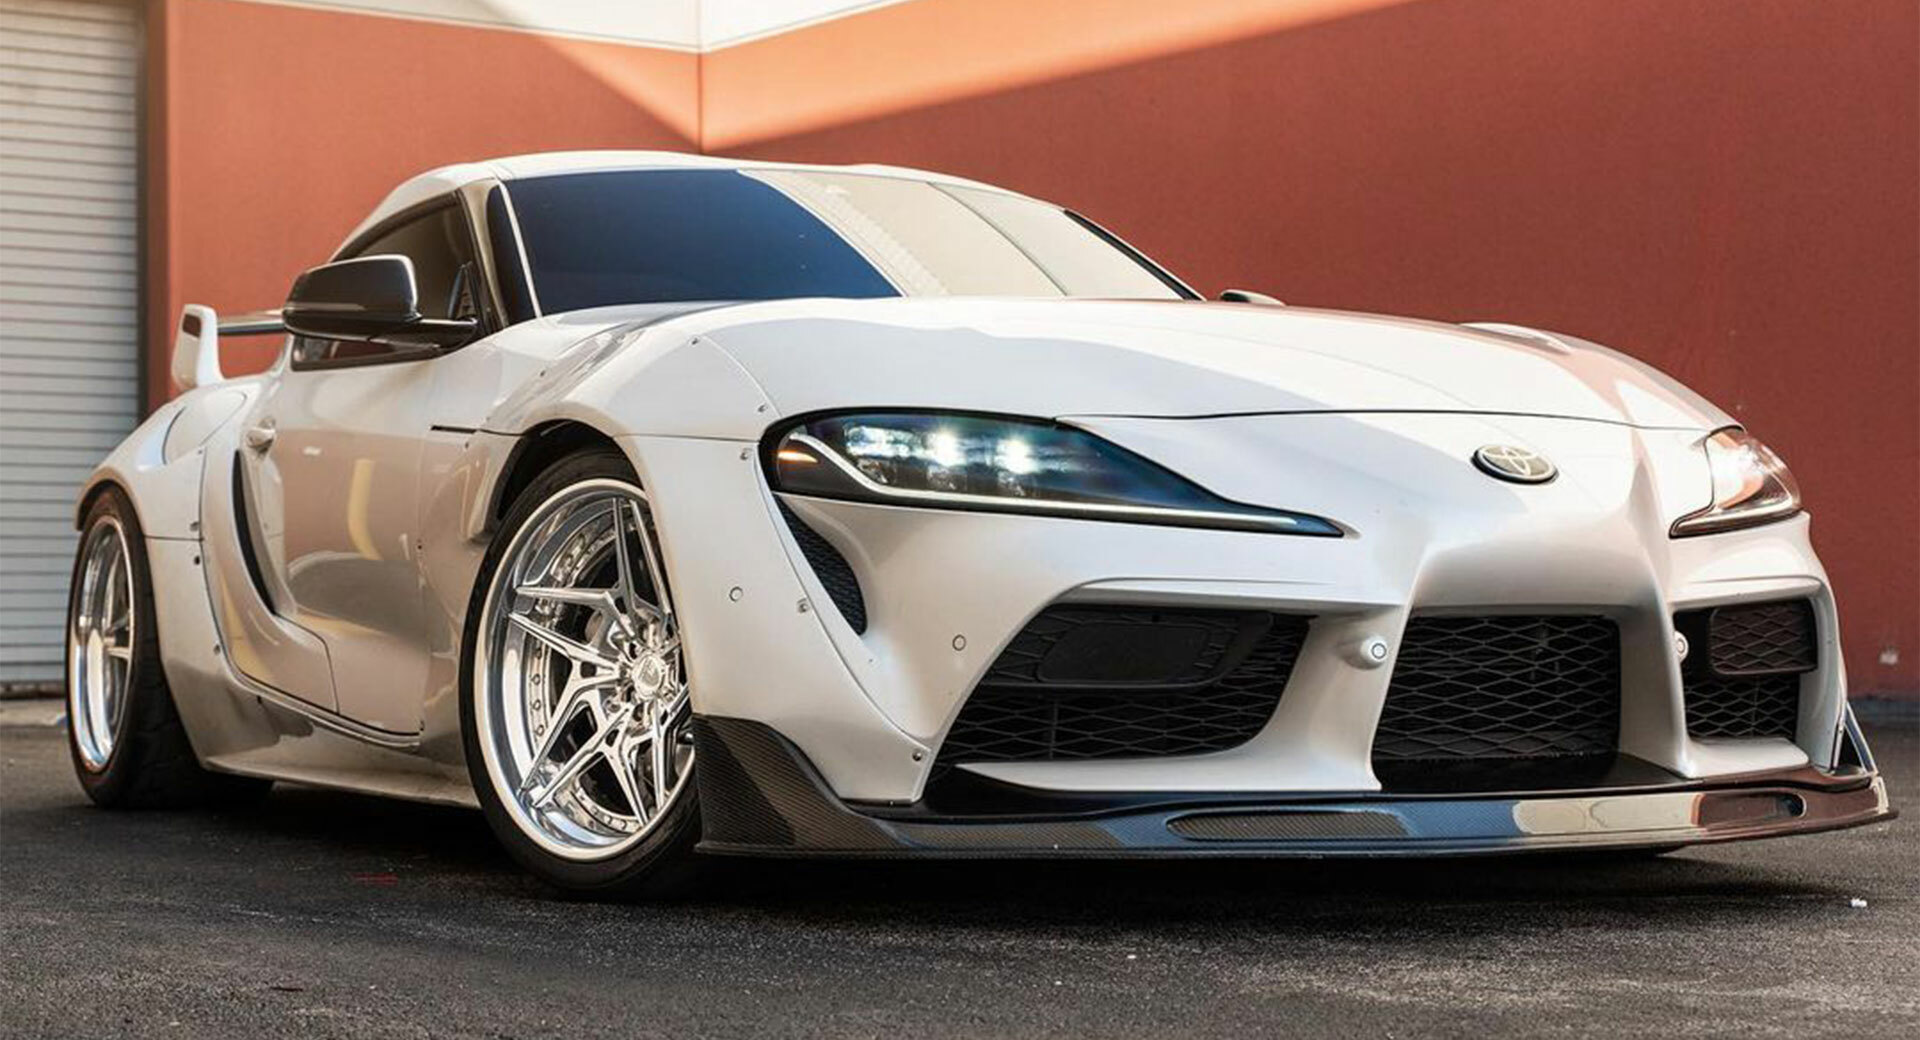 Review: Toyota Supra is a head-turner